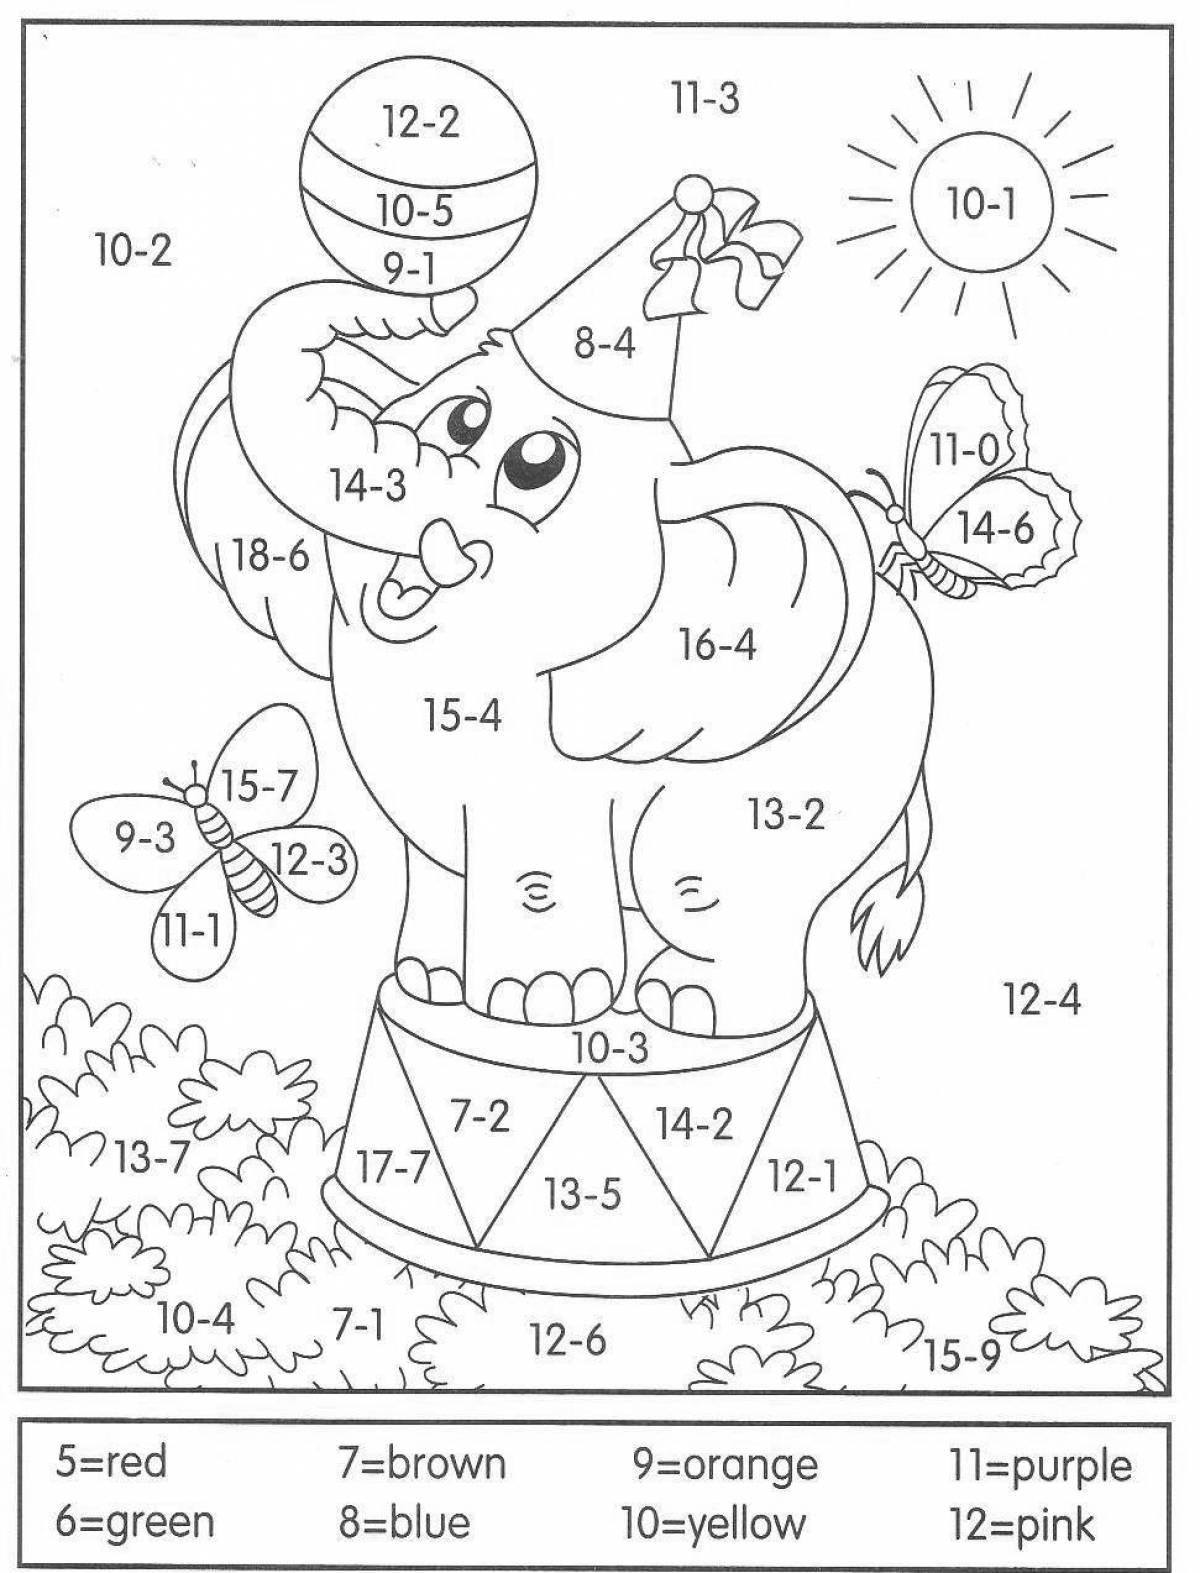 An example of an ornate coloring page